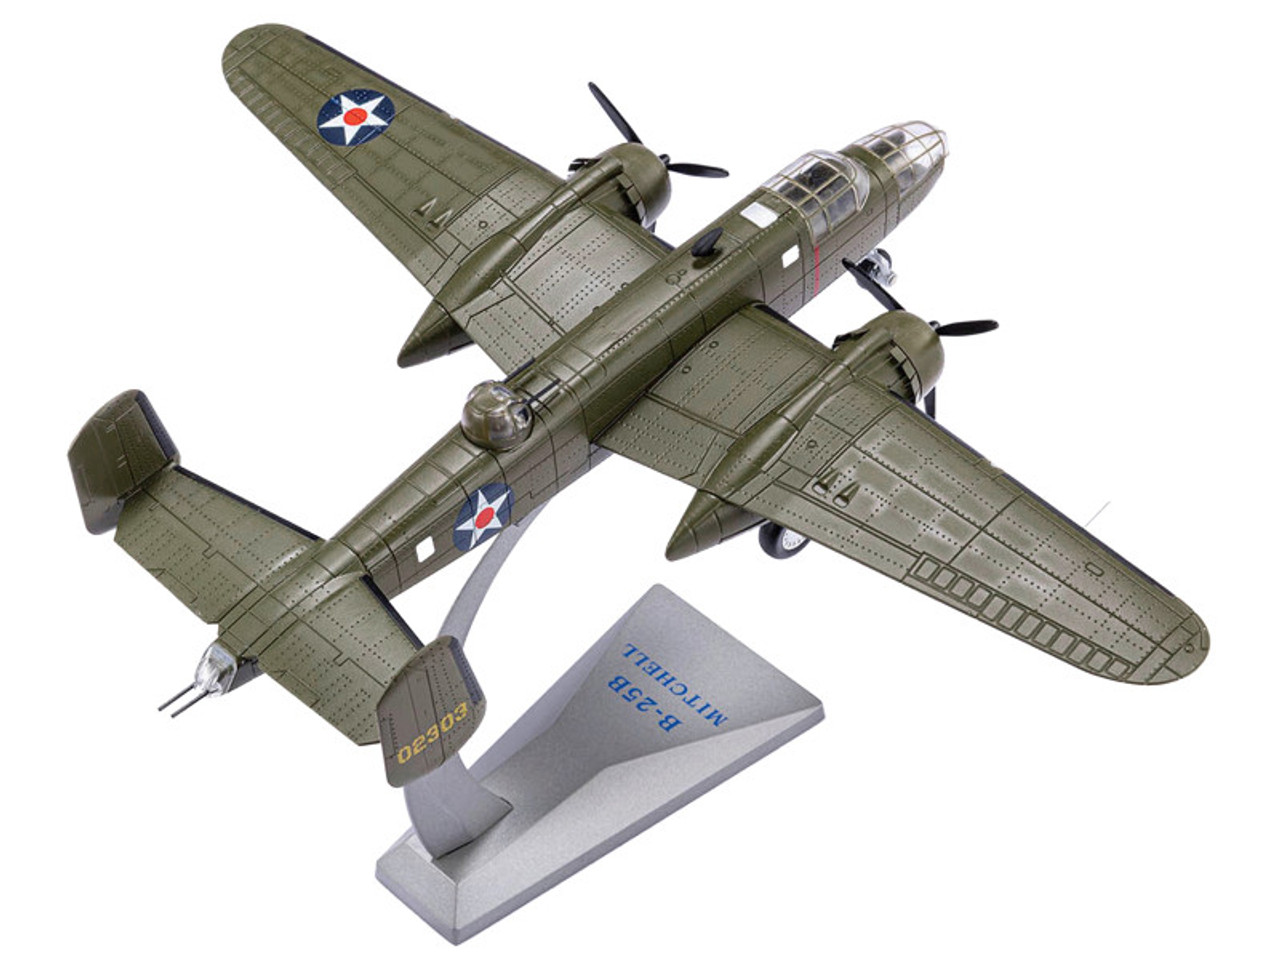 North American B-25B Mitchell Bomber Aircraft "Whirling Dervish 34 Bomber Squadron 17th Bomber Group" United States Air Force 1/72 Diecast Model by Air Force 1